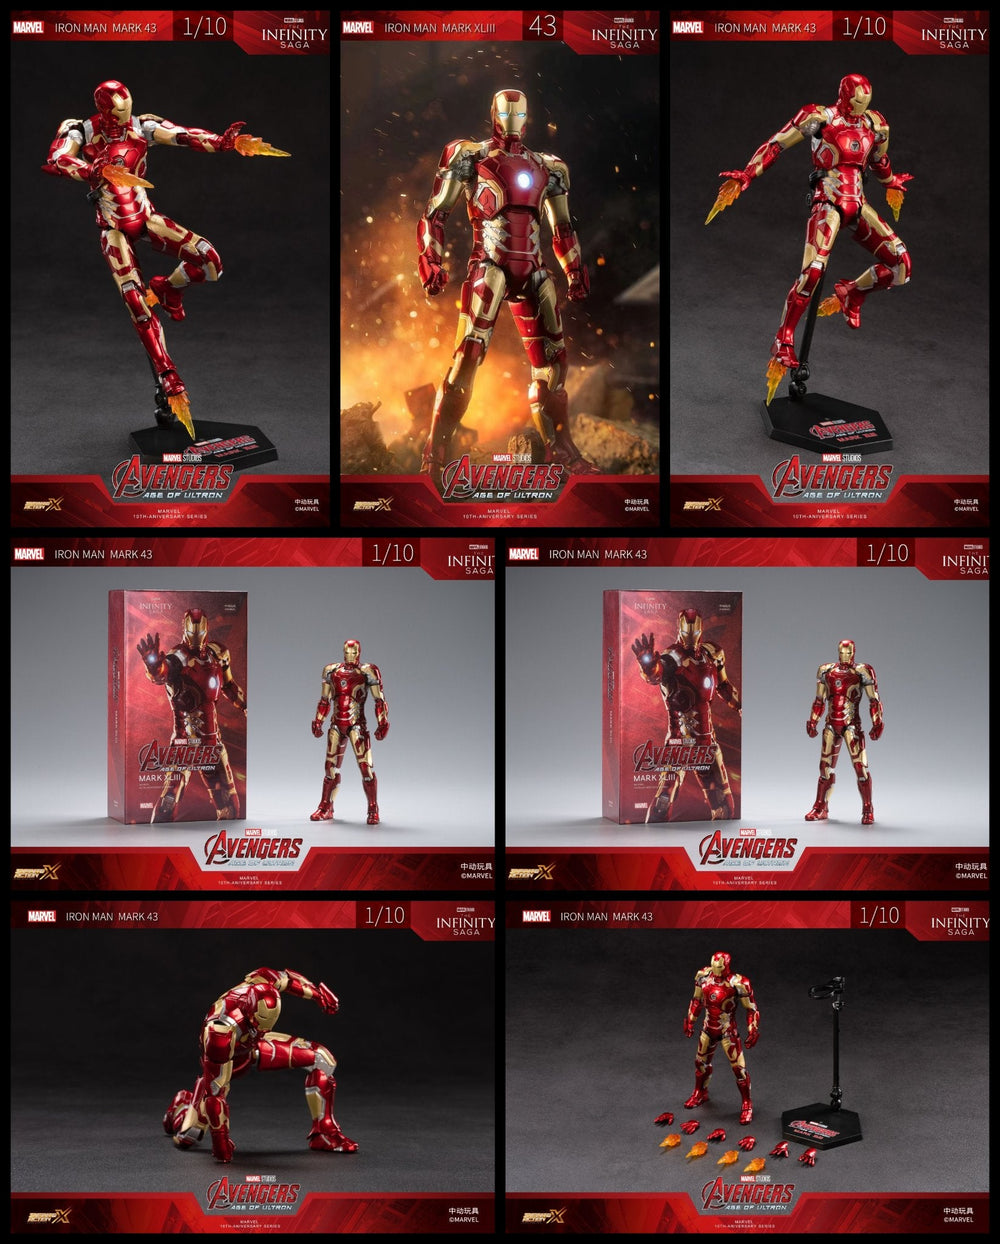 ONHAND ZD Toys Avengers: Age of Ultron Ironman Mark 43